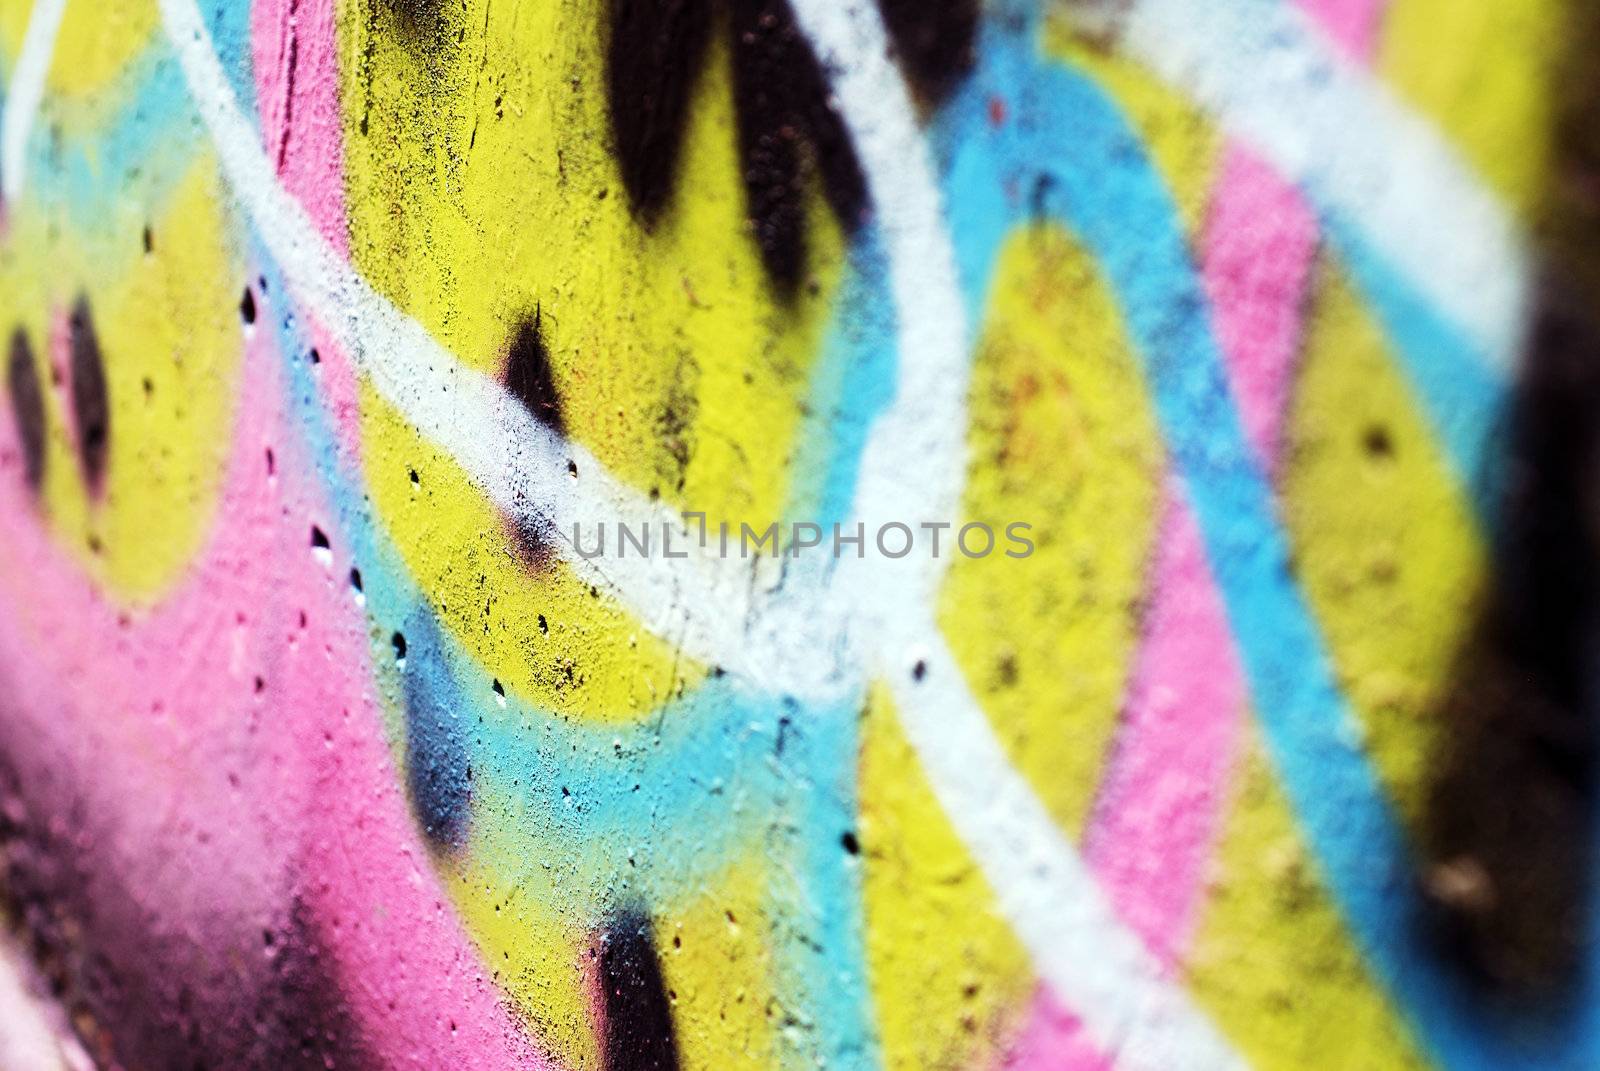 A close up photograph of spray painted graffiti on a public wall